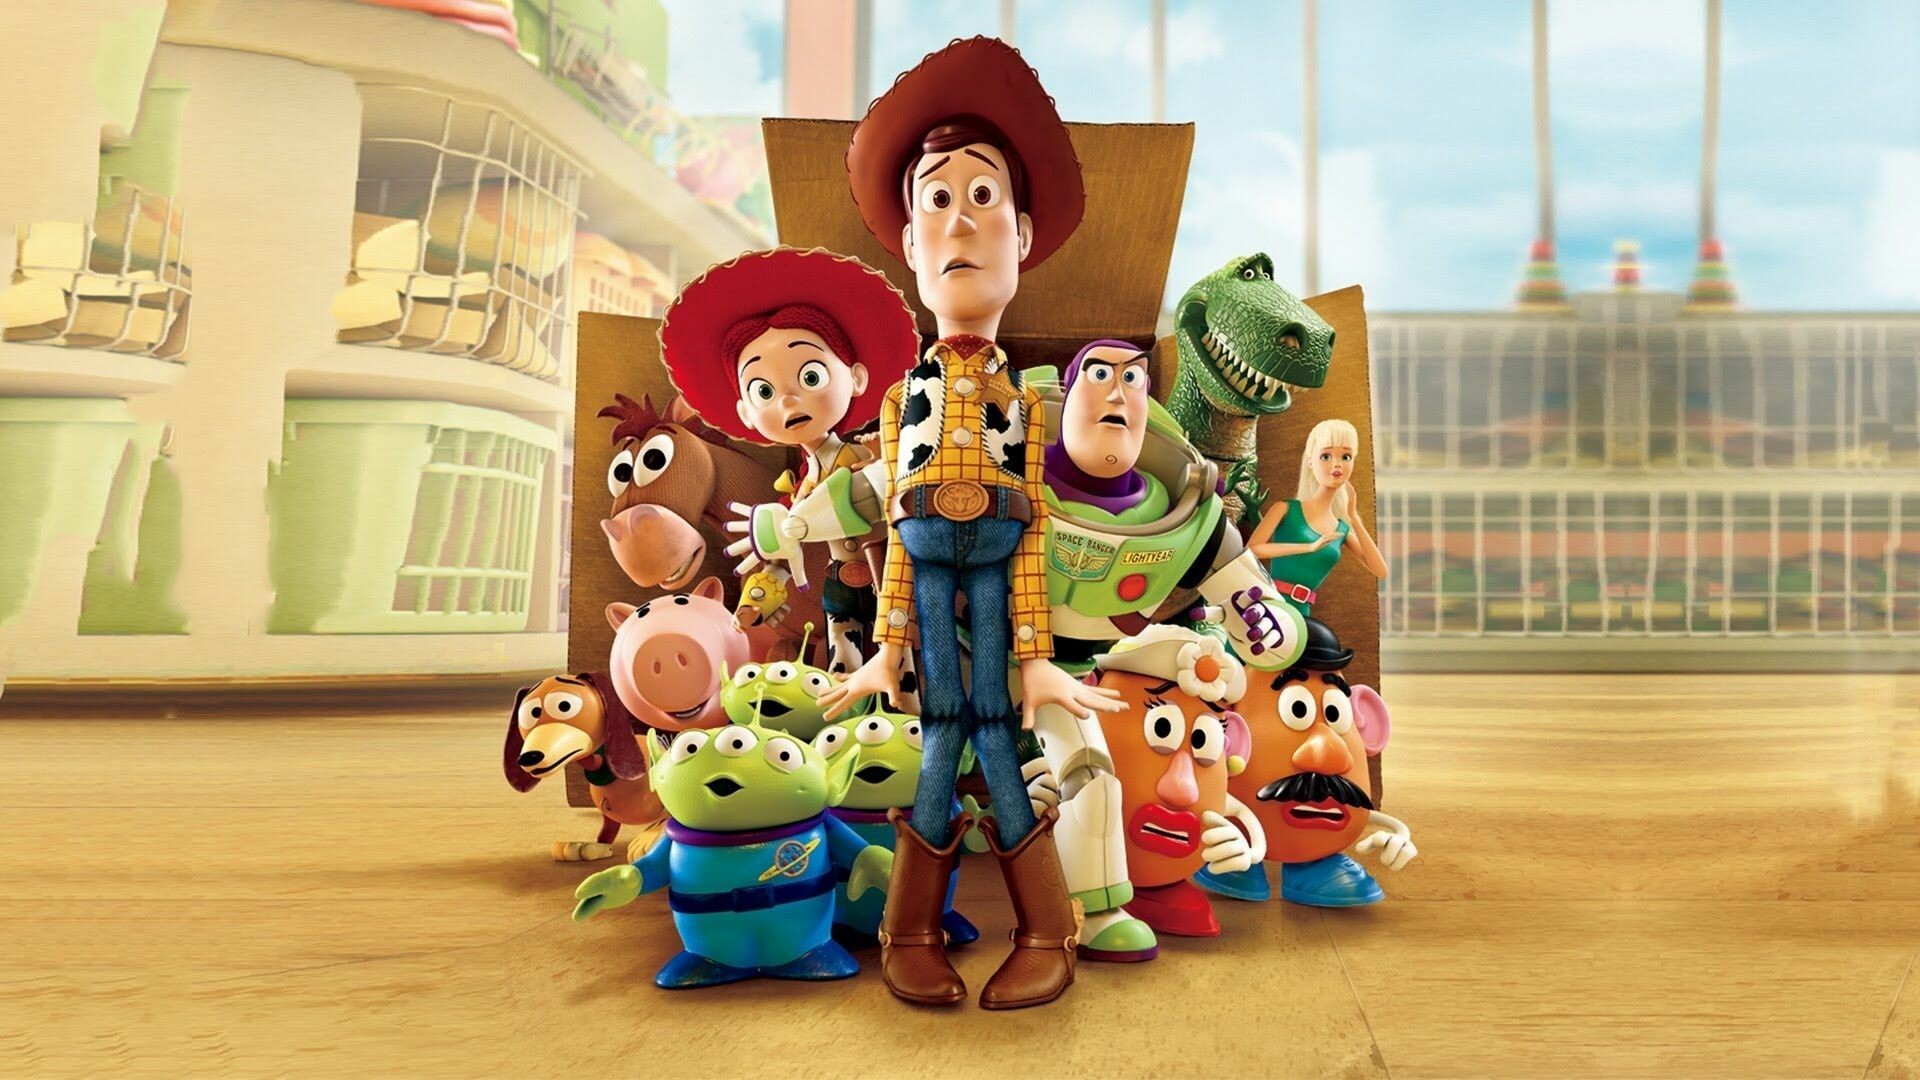 Toy Story: The film's ensemble voice cast, Tom Hanks, Tim Allen, Joan Cusack, Don Rickles, Wallace Shawn. 1920x1080 Full HD Wallpaper.